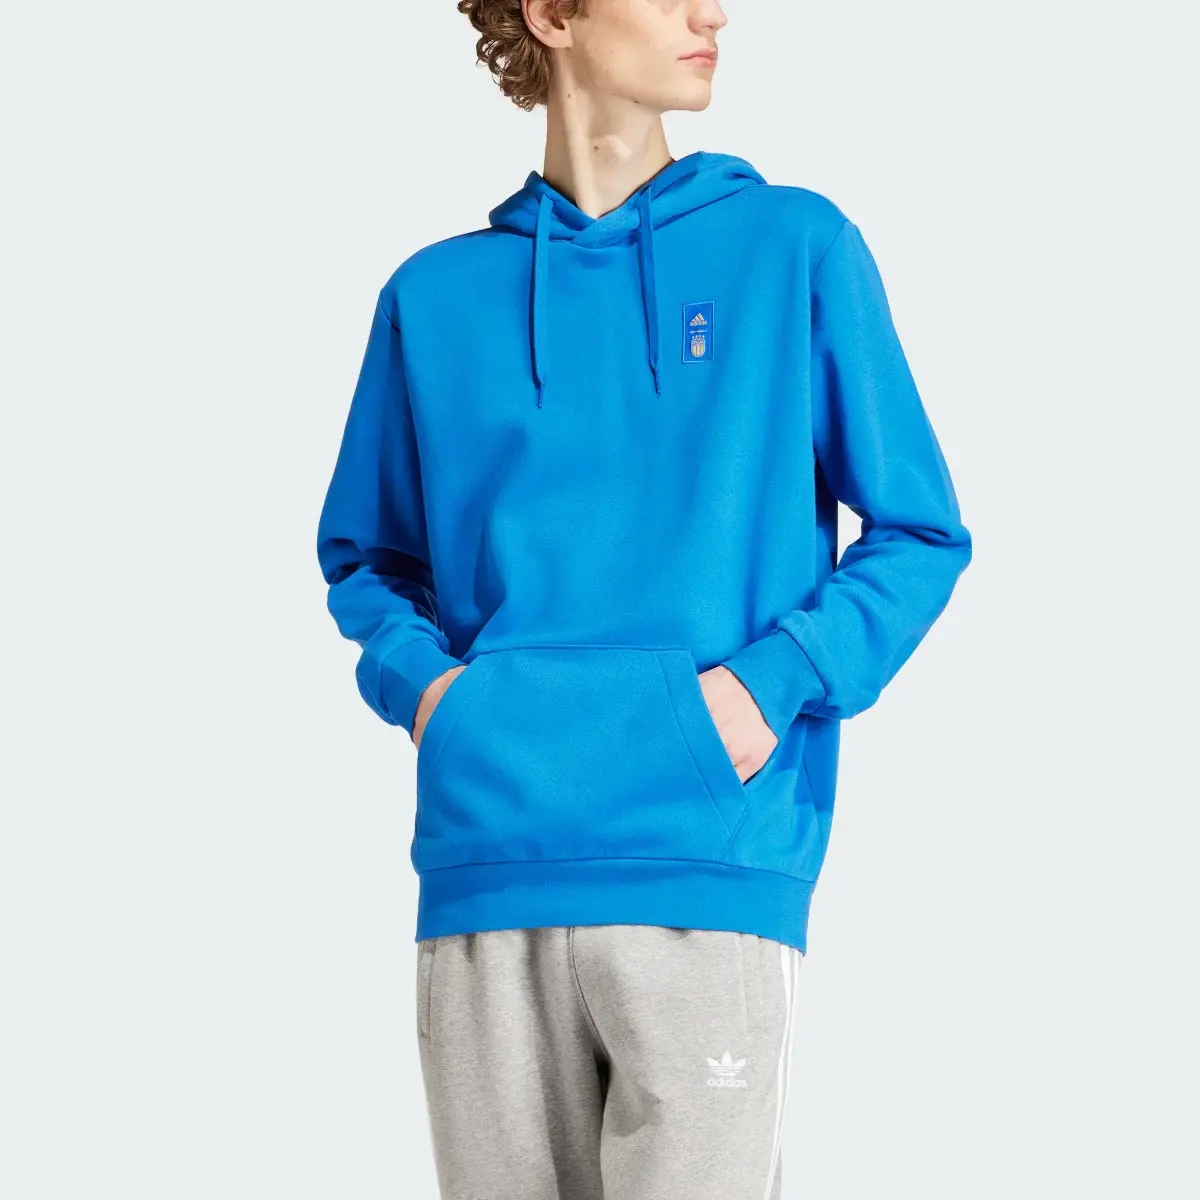 Adidas Italy DNA Hoodie. 1